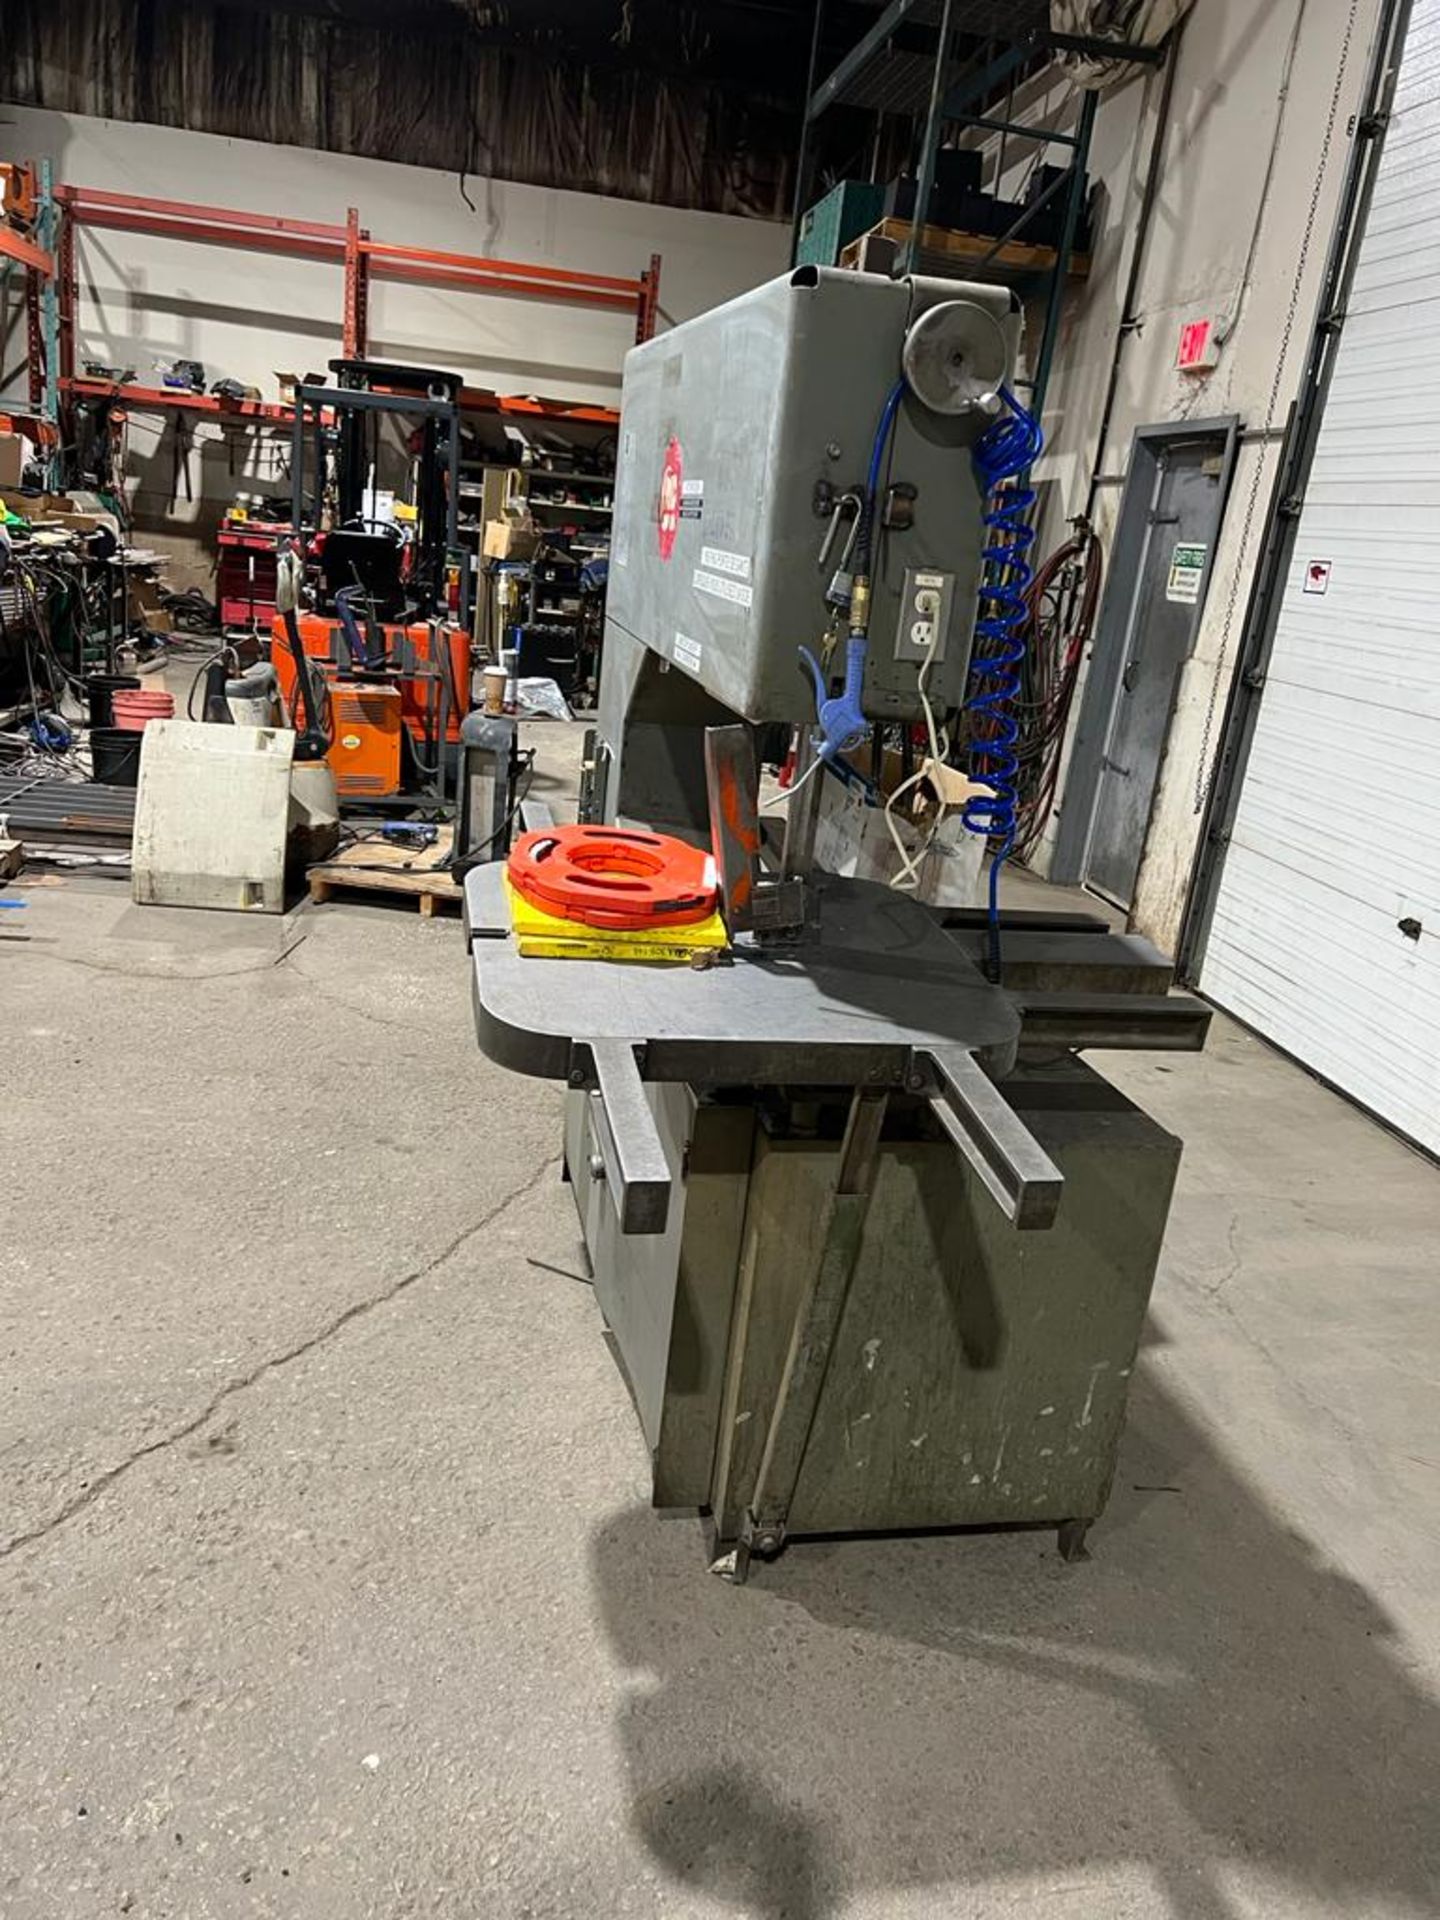 Grob 36" Cutting Capacity Vertical Band Saw with Tilting Table, Blade Welder and Extra blades - Image 3 of 3